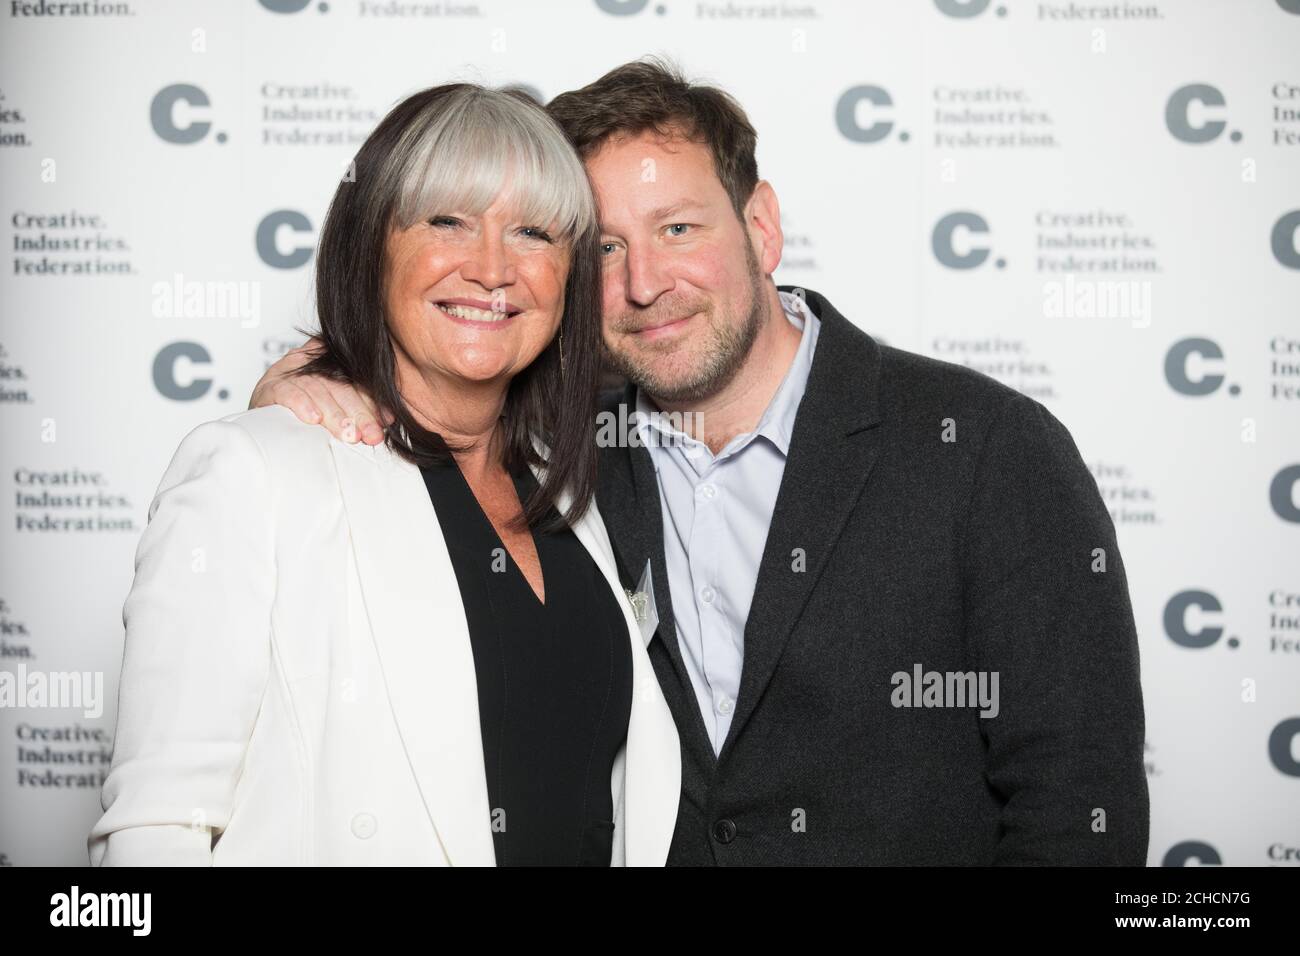 EDITORIAL USE ONLY Sandy Shaw and Ed Vaizey attend the Creative Industries Federation's third birthday party at the Natural History Museum, London. PRESS ASSOCIATION. Photo. Picture date: Tuesday January 9, 2018. The evening featured the launch of Circus 250, a year-long, nationwide celebration of the 250th anniversary of the Circus, including a strong woman and aerial acrobatics. Photo credit should read: David Parry/PA Wire  Stock Photo